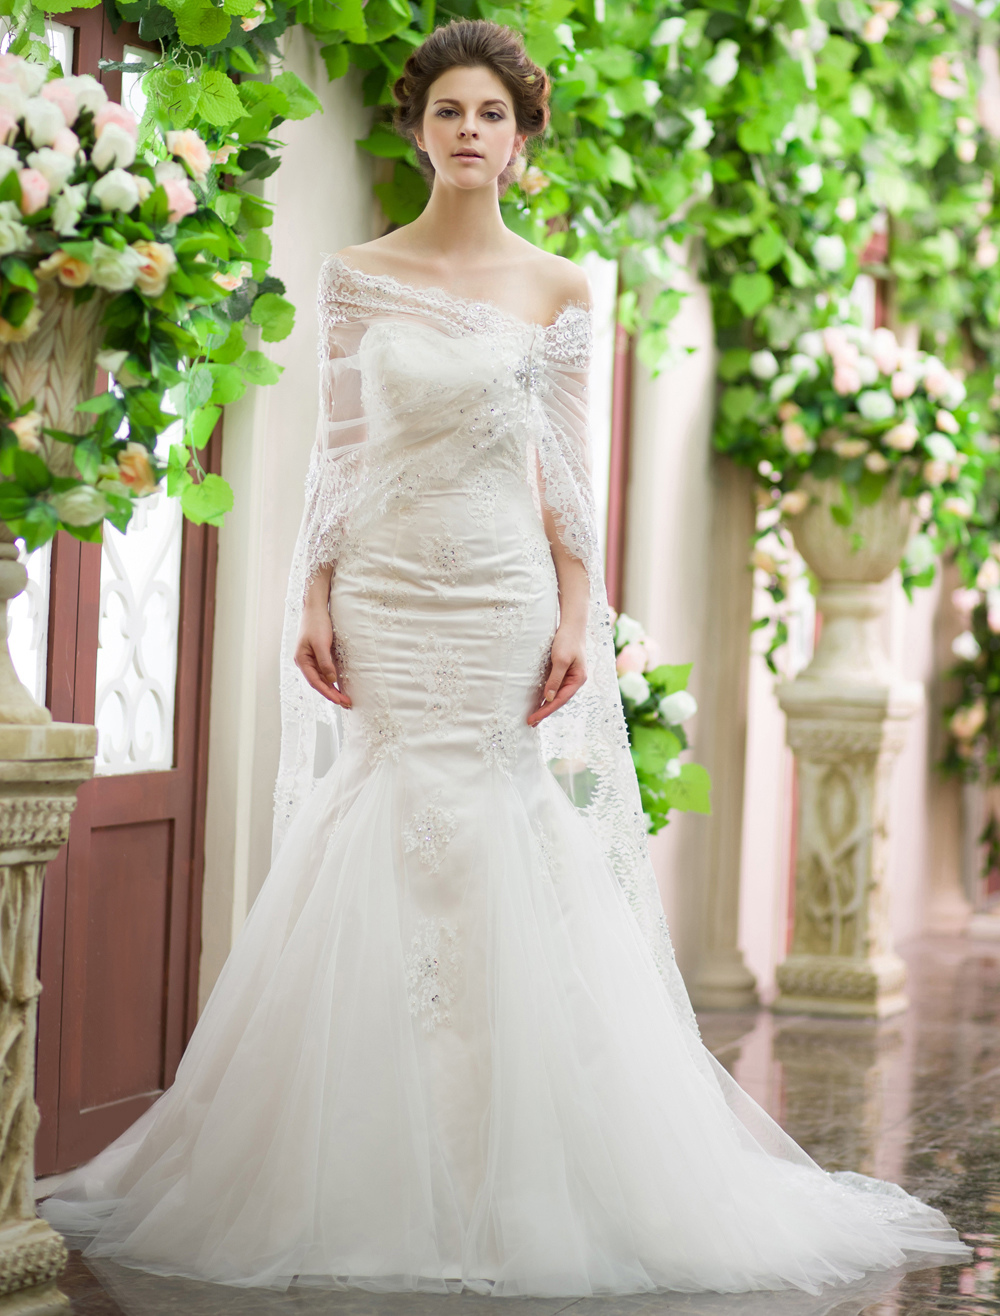 Amazing Milanoo Wedding Dress of all time Don t miss out 